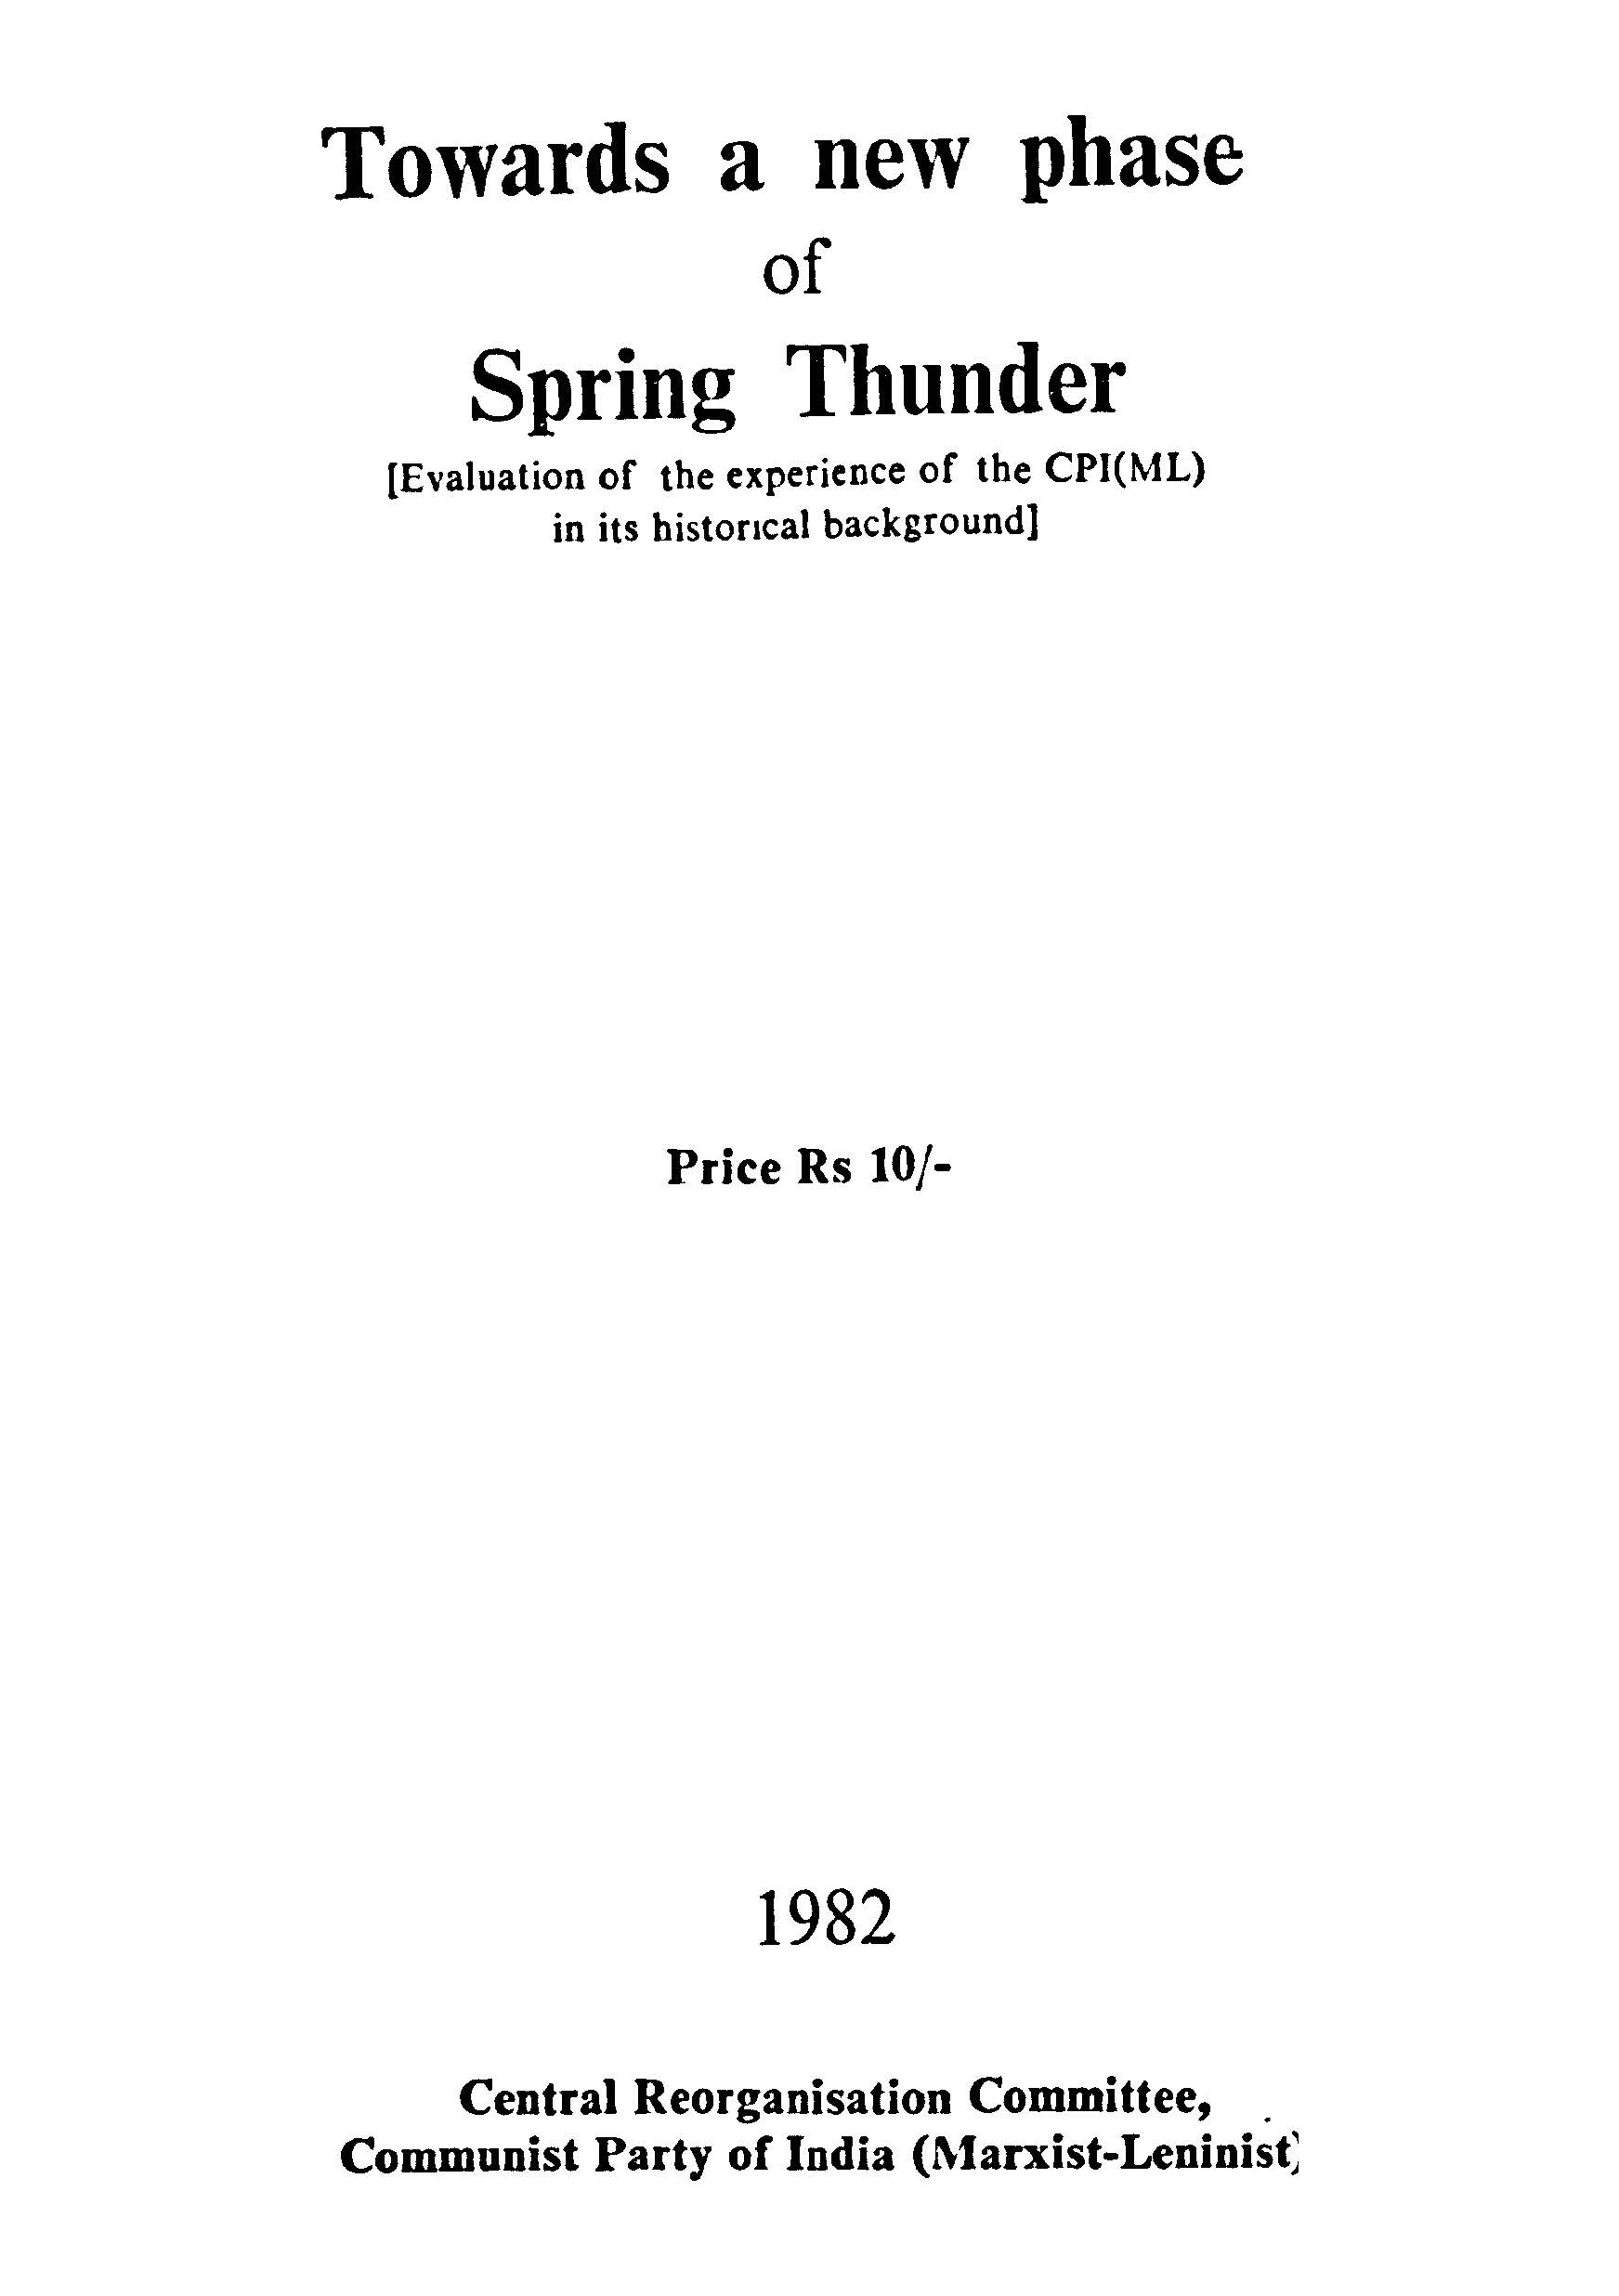 Towards a new phase of spring thunder